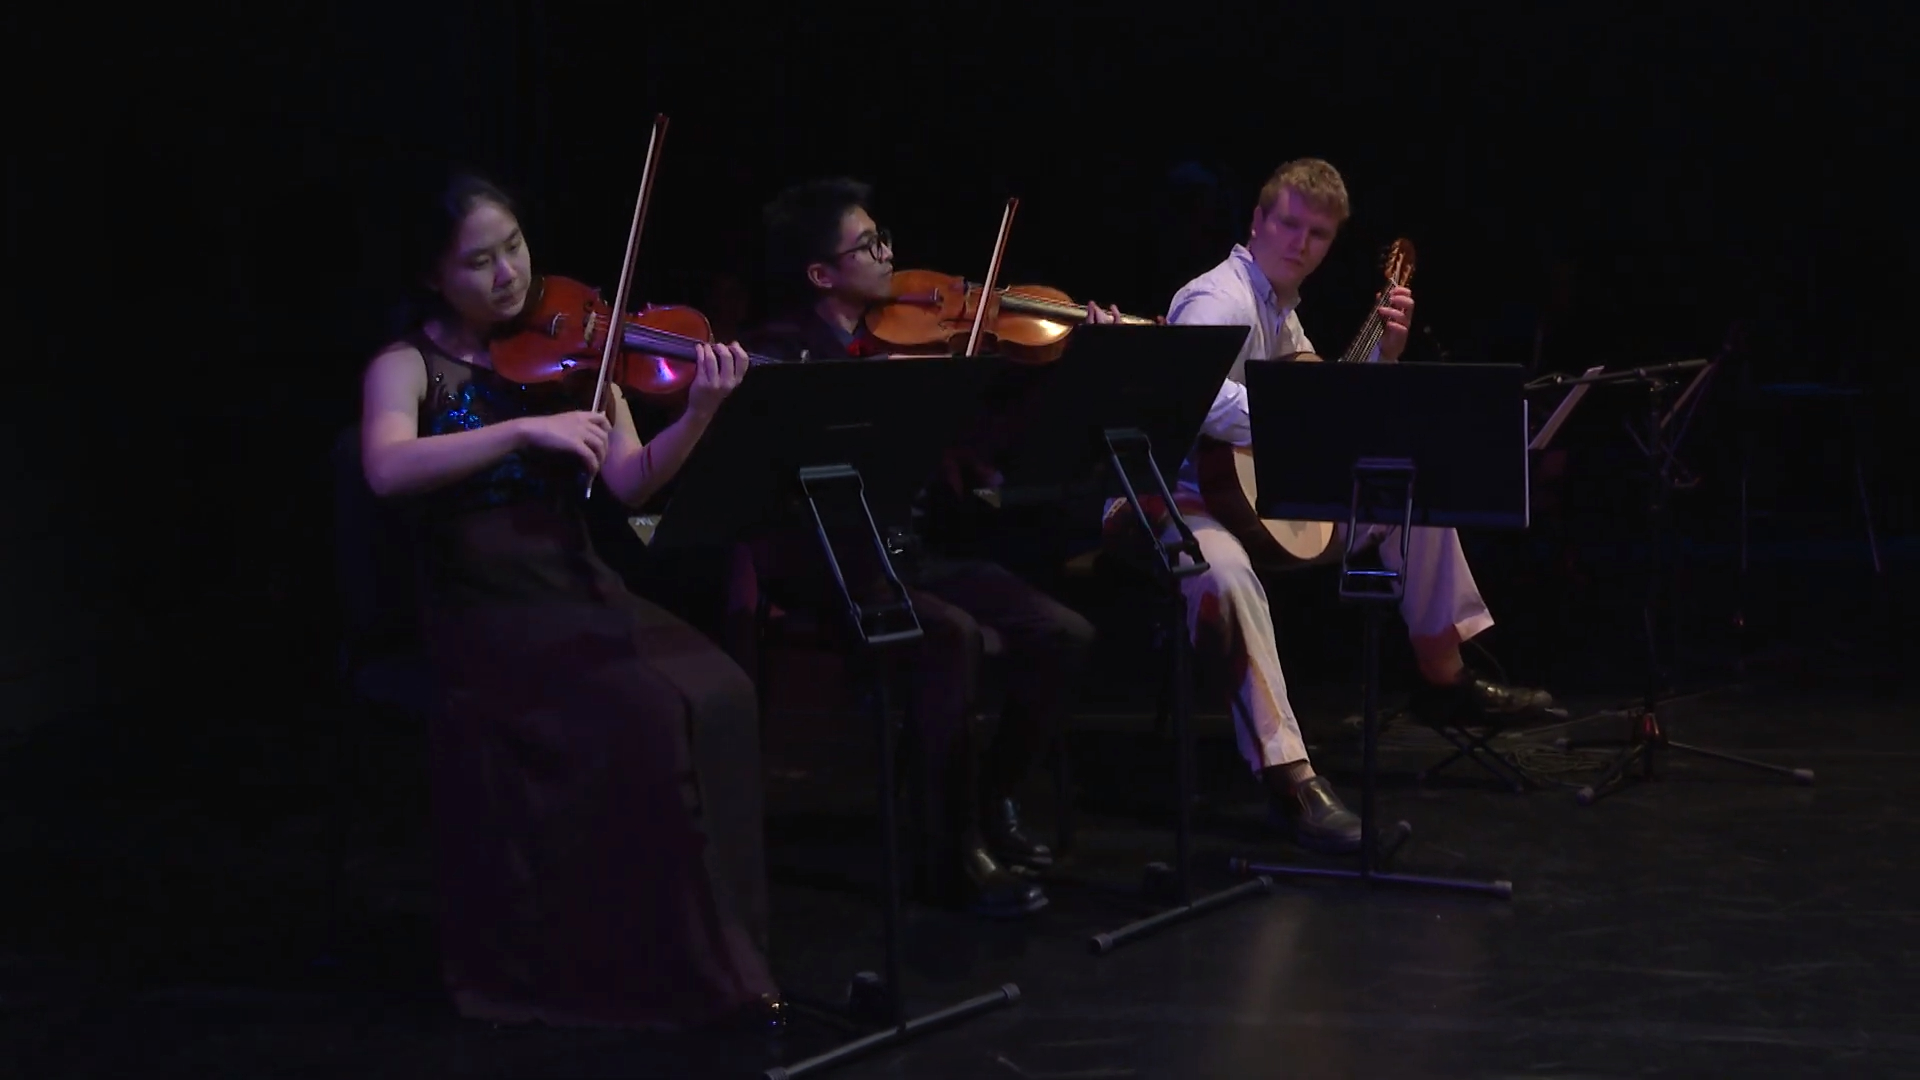 Thatcher Harrison, Cheng Io Lo, and Cheng Io Lo perform 'Remembrance Brazil' at YoungArts New York (2019)